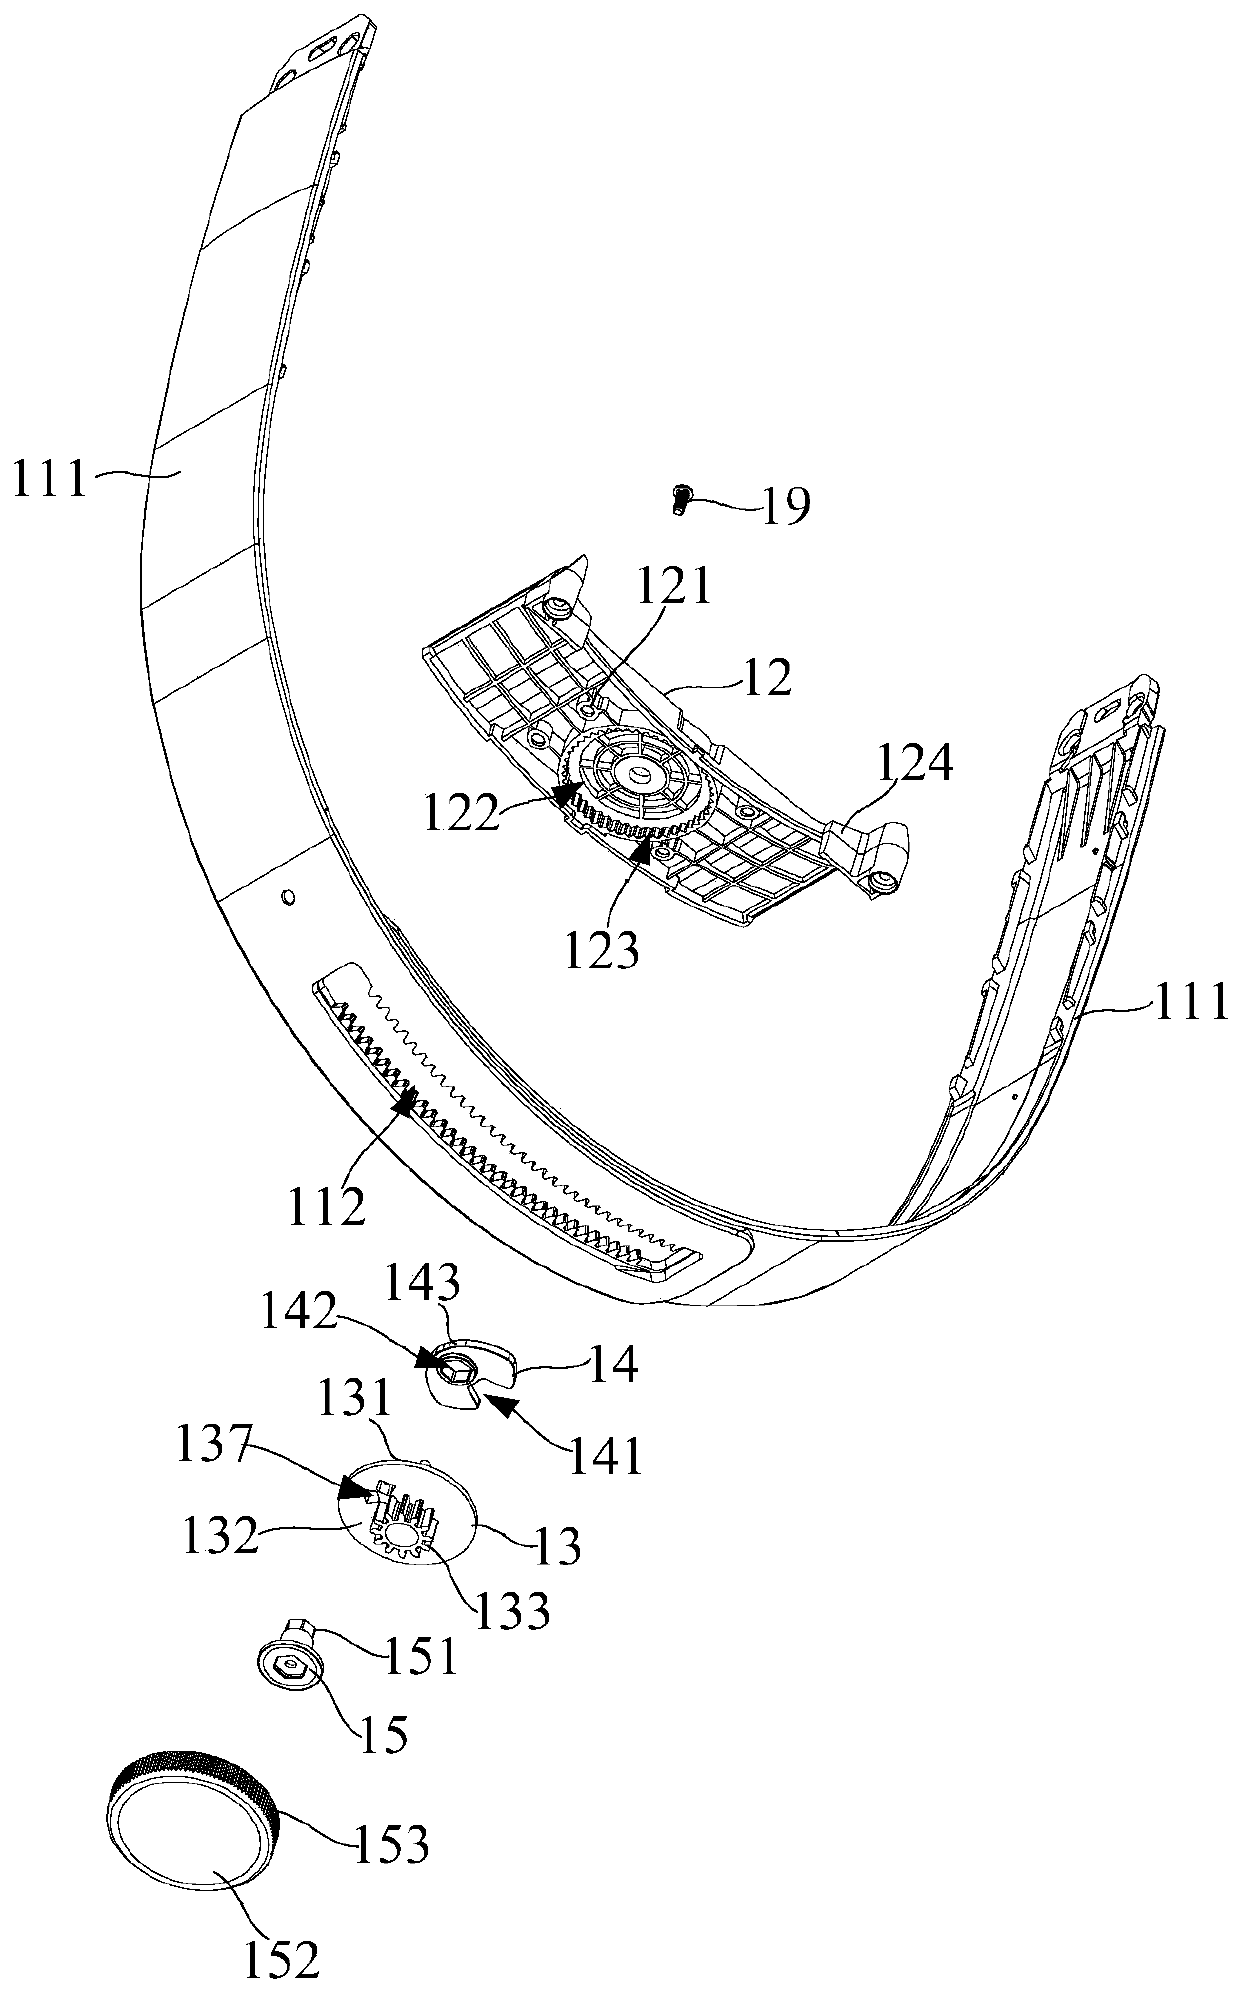 Head-mounted device bracket and head-mounted device